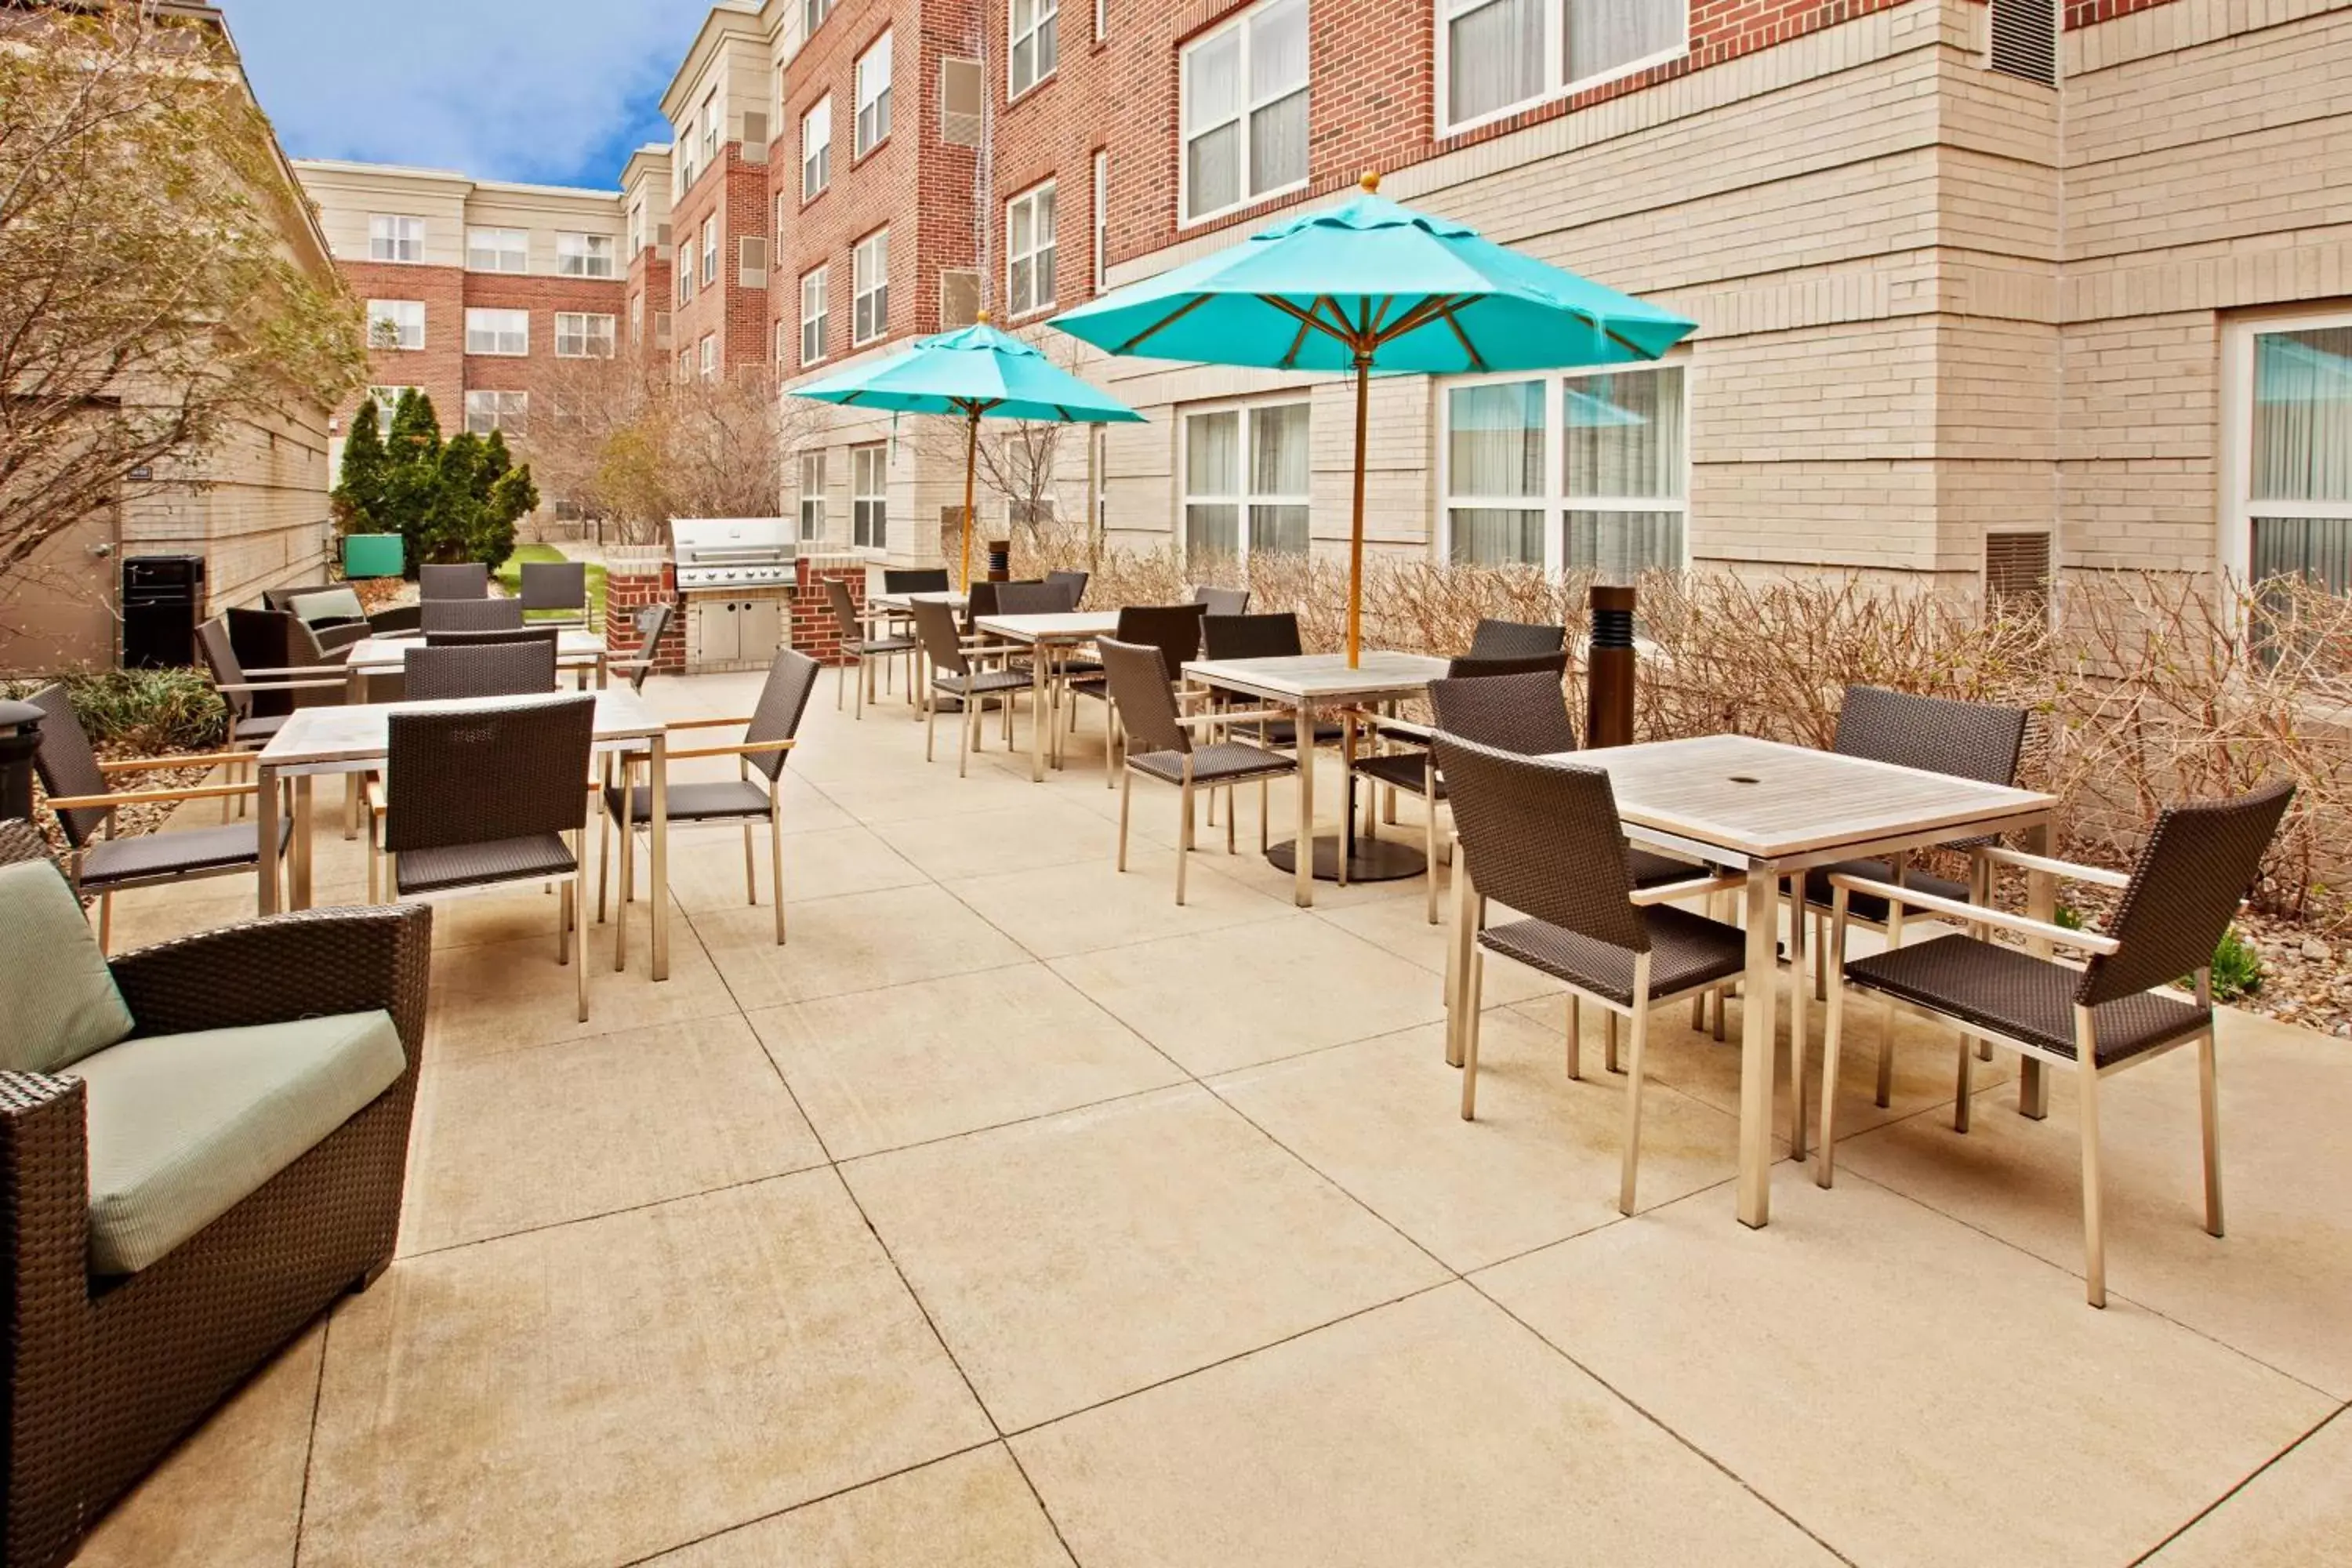 Property building in Residence Inn Indianapolis Carmel